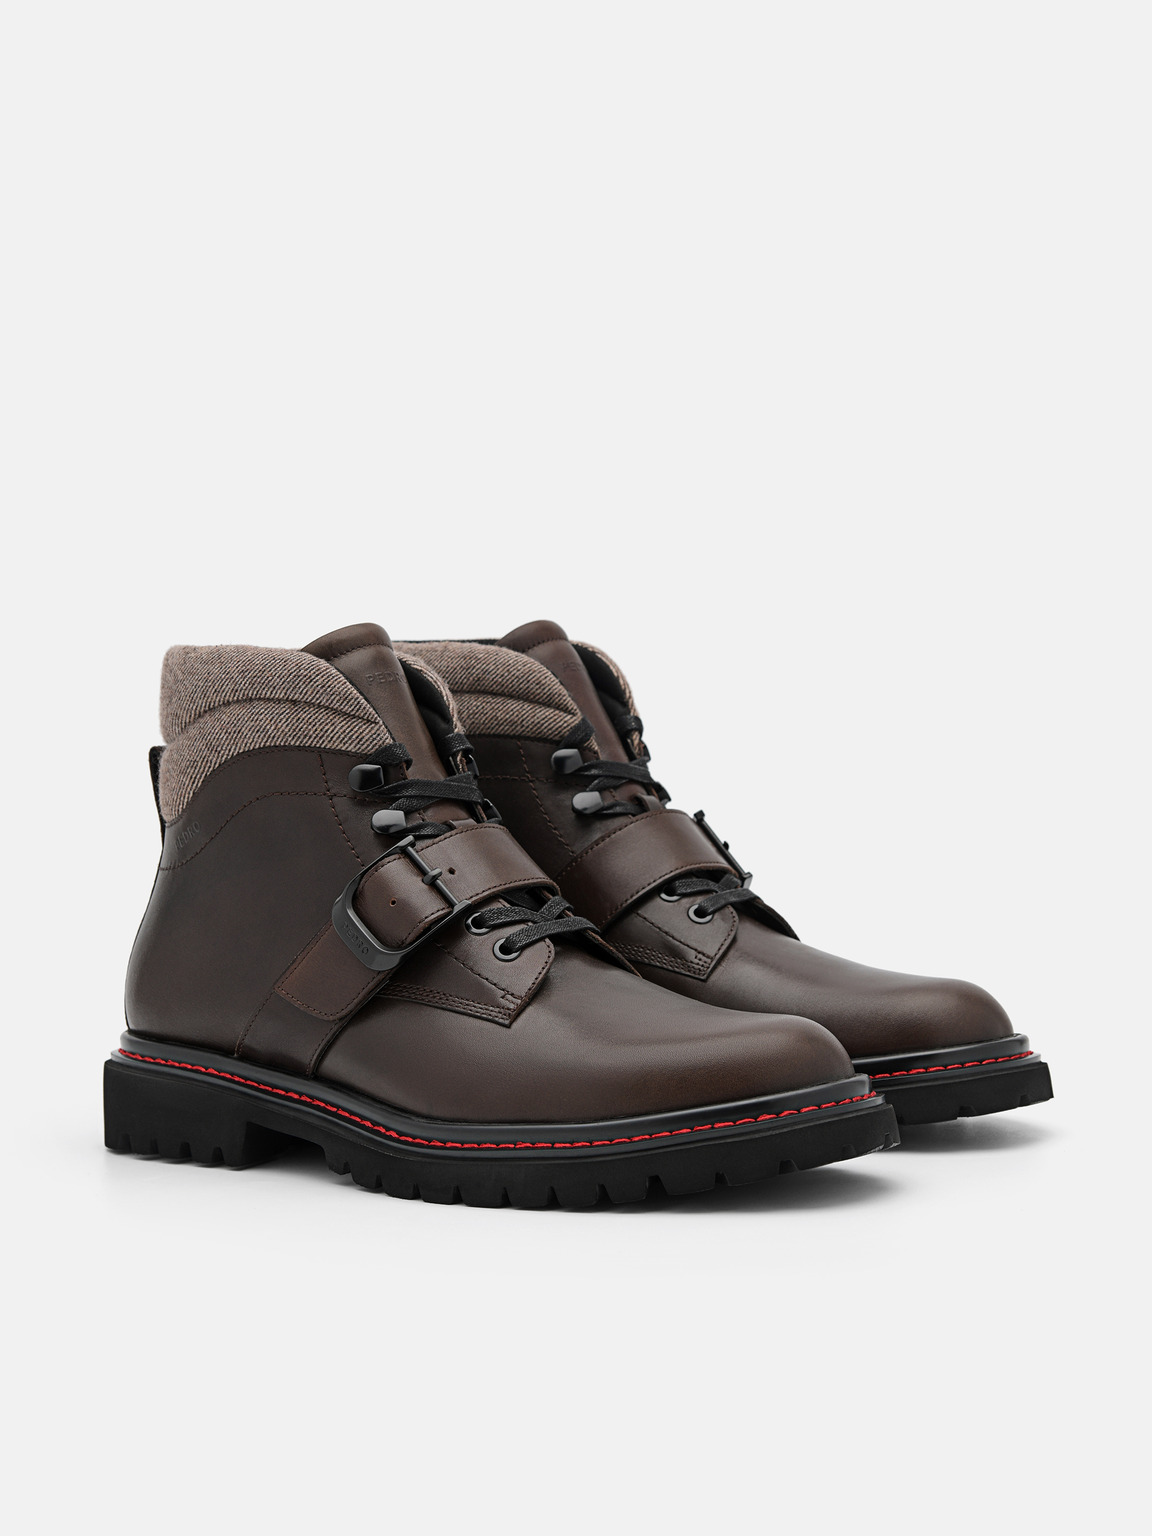 Helix Leather Boots, Dark Brown